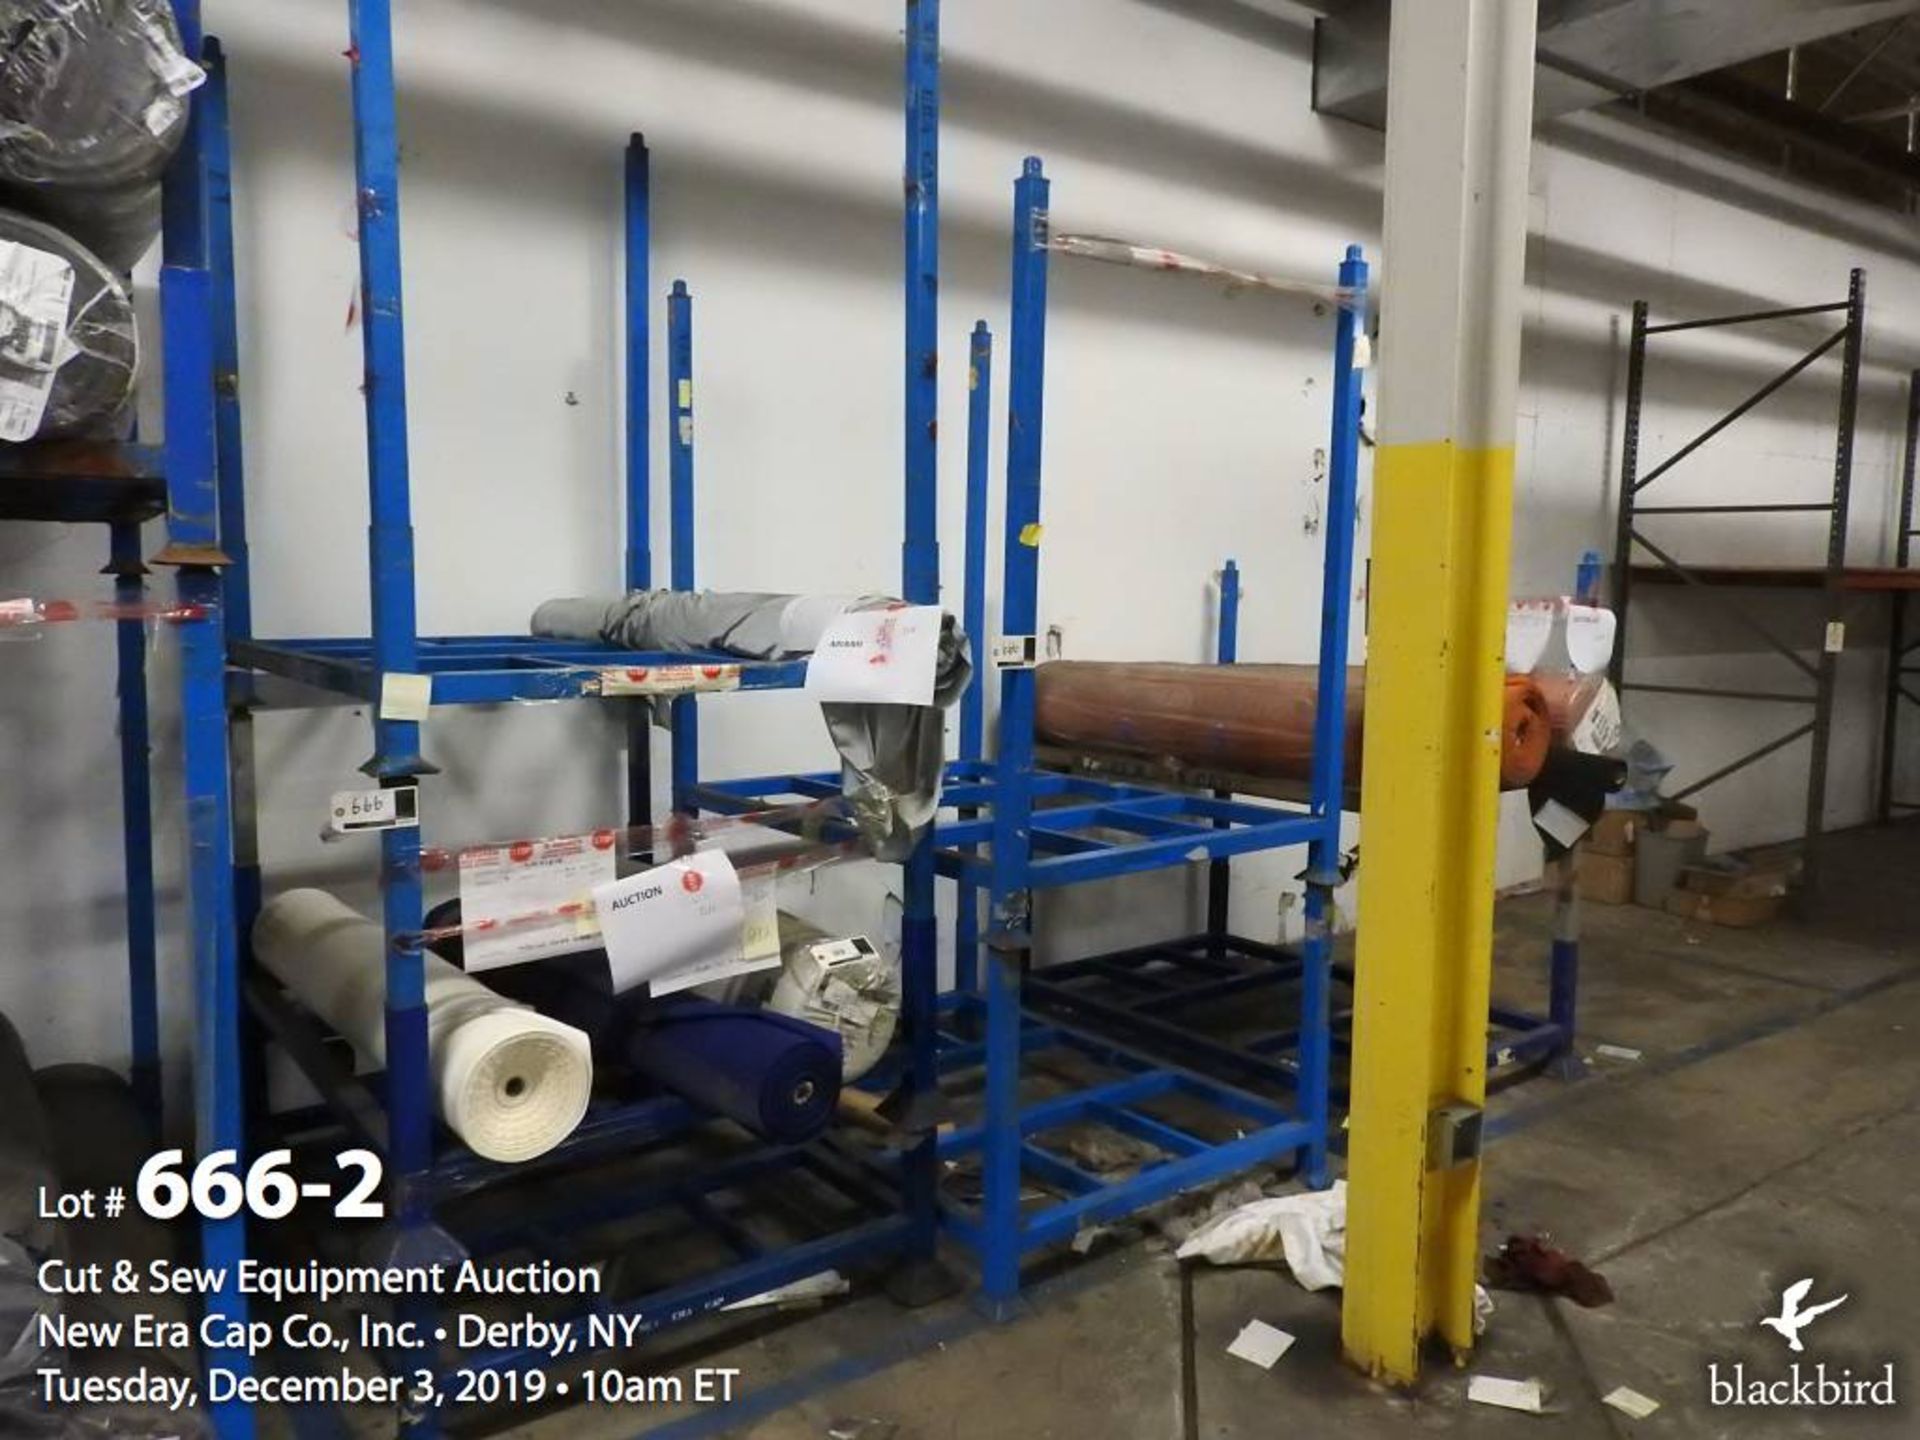 15 Sections of 5' x 45" x 63" high tier racks, bid per section - 15x the money - Image 2 of 2